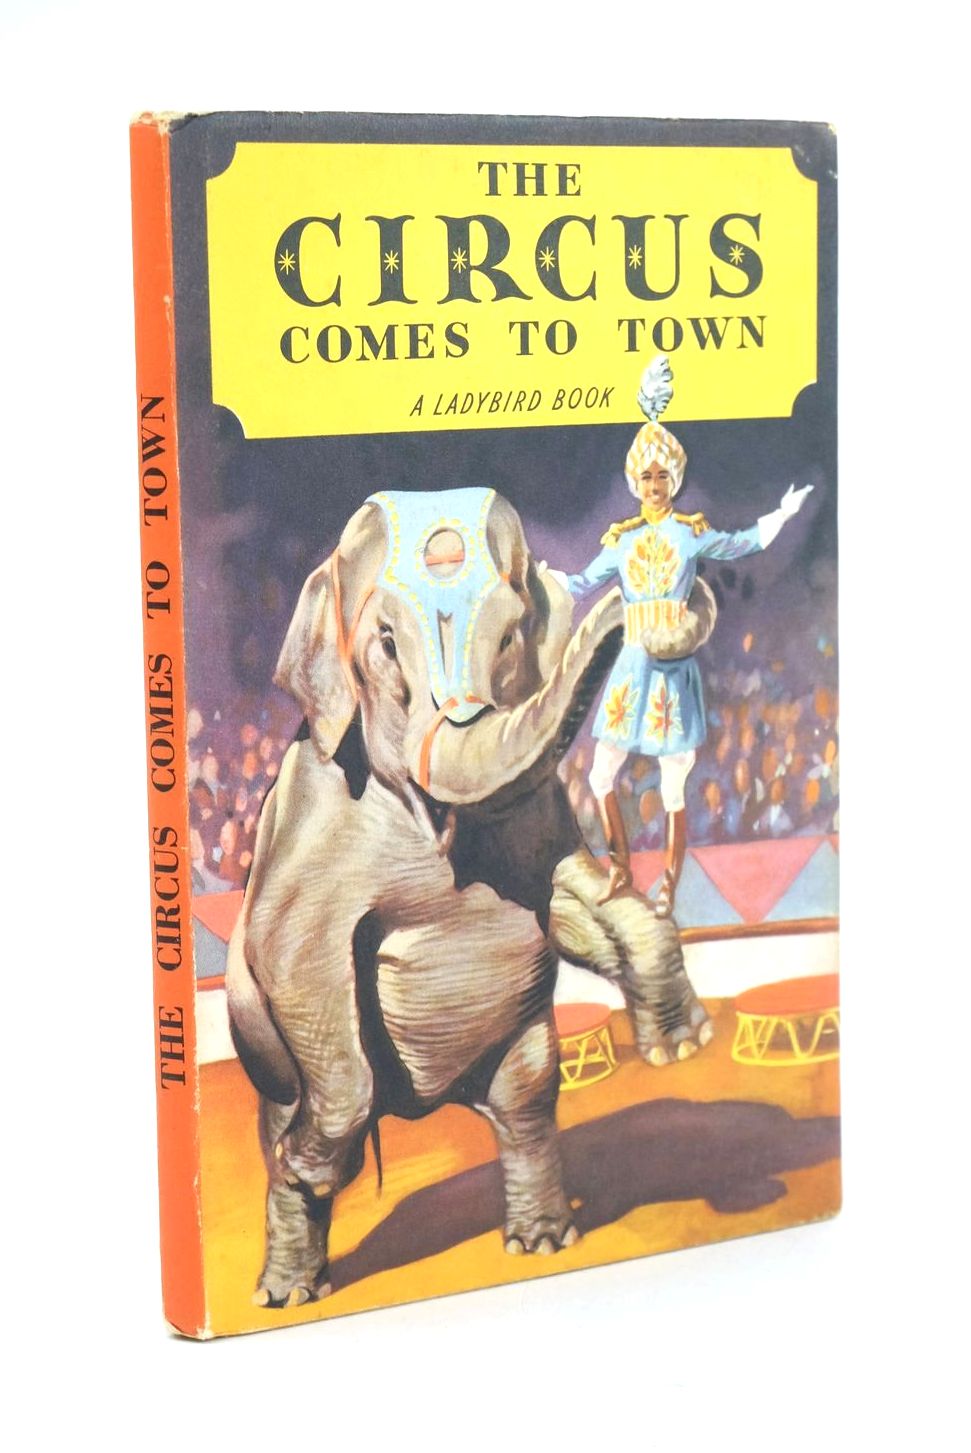 Photo of THE CIRCUS COMES TO TOWN written by Constanduros, Denis illustrated by Kenney, John published by Wills &amp; Hepworth Ltd. (STOCK CODE: 1324675)  for sale by Stella & Rose's Books